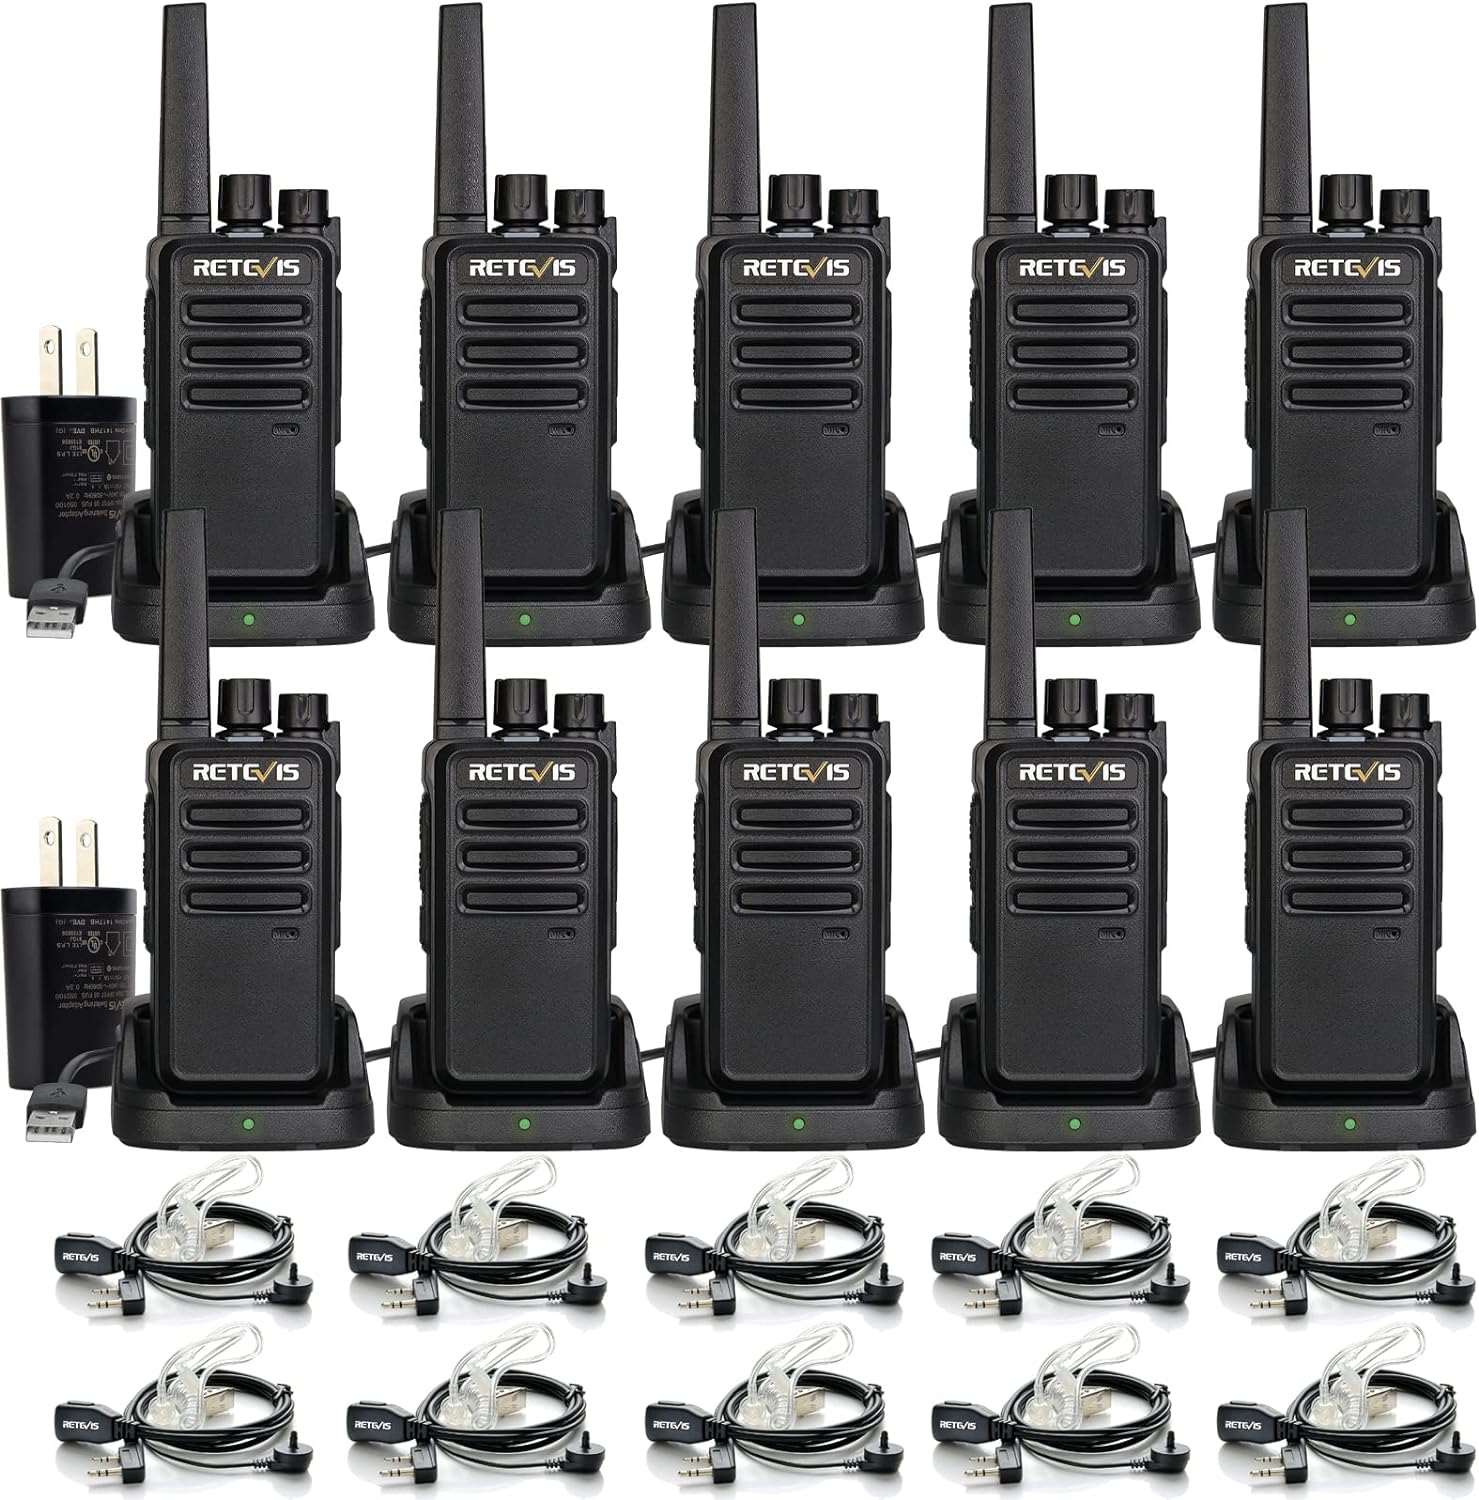 Retevis RT68 Two-way Radios Long Range, Walkie Talkies for Adults, 2 Way Radio with Earpiece, Walkie Talkie Rechargeable with Charging Base, for Manufacturing Restaurant Business(10 Pack)